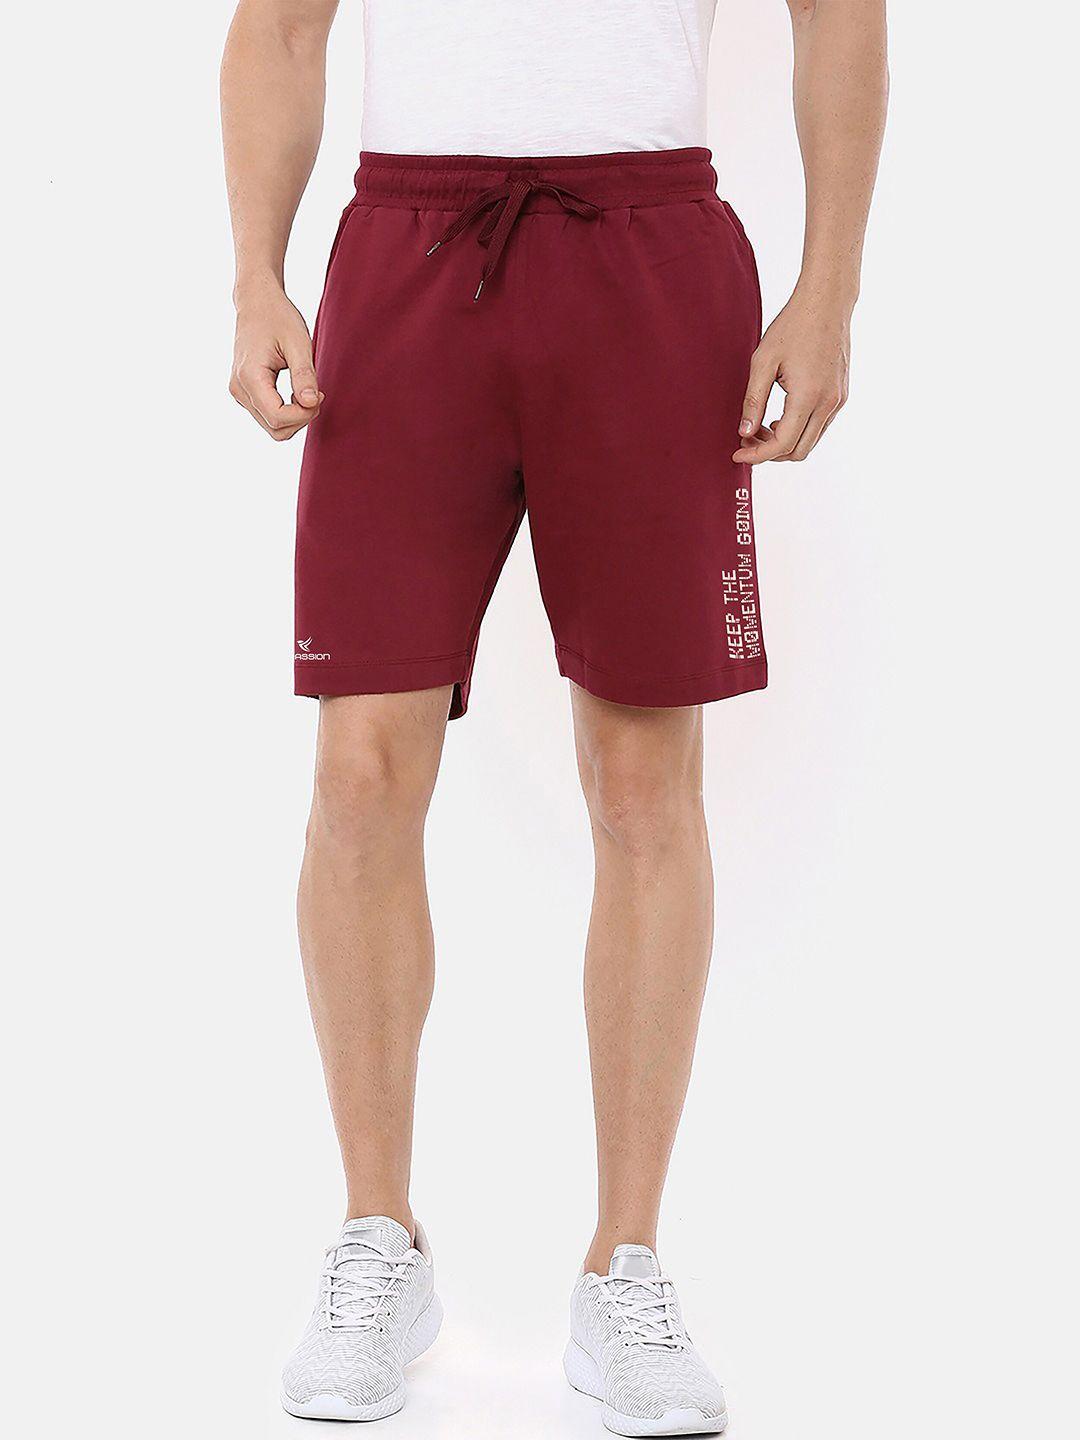 dpassion men maroon solid training or gym sports shorts